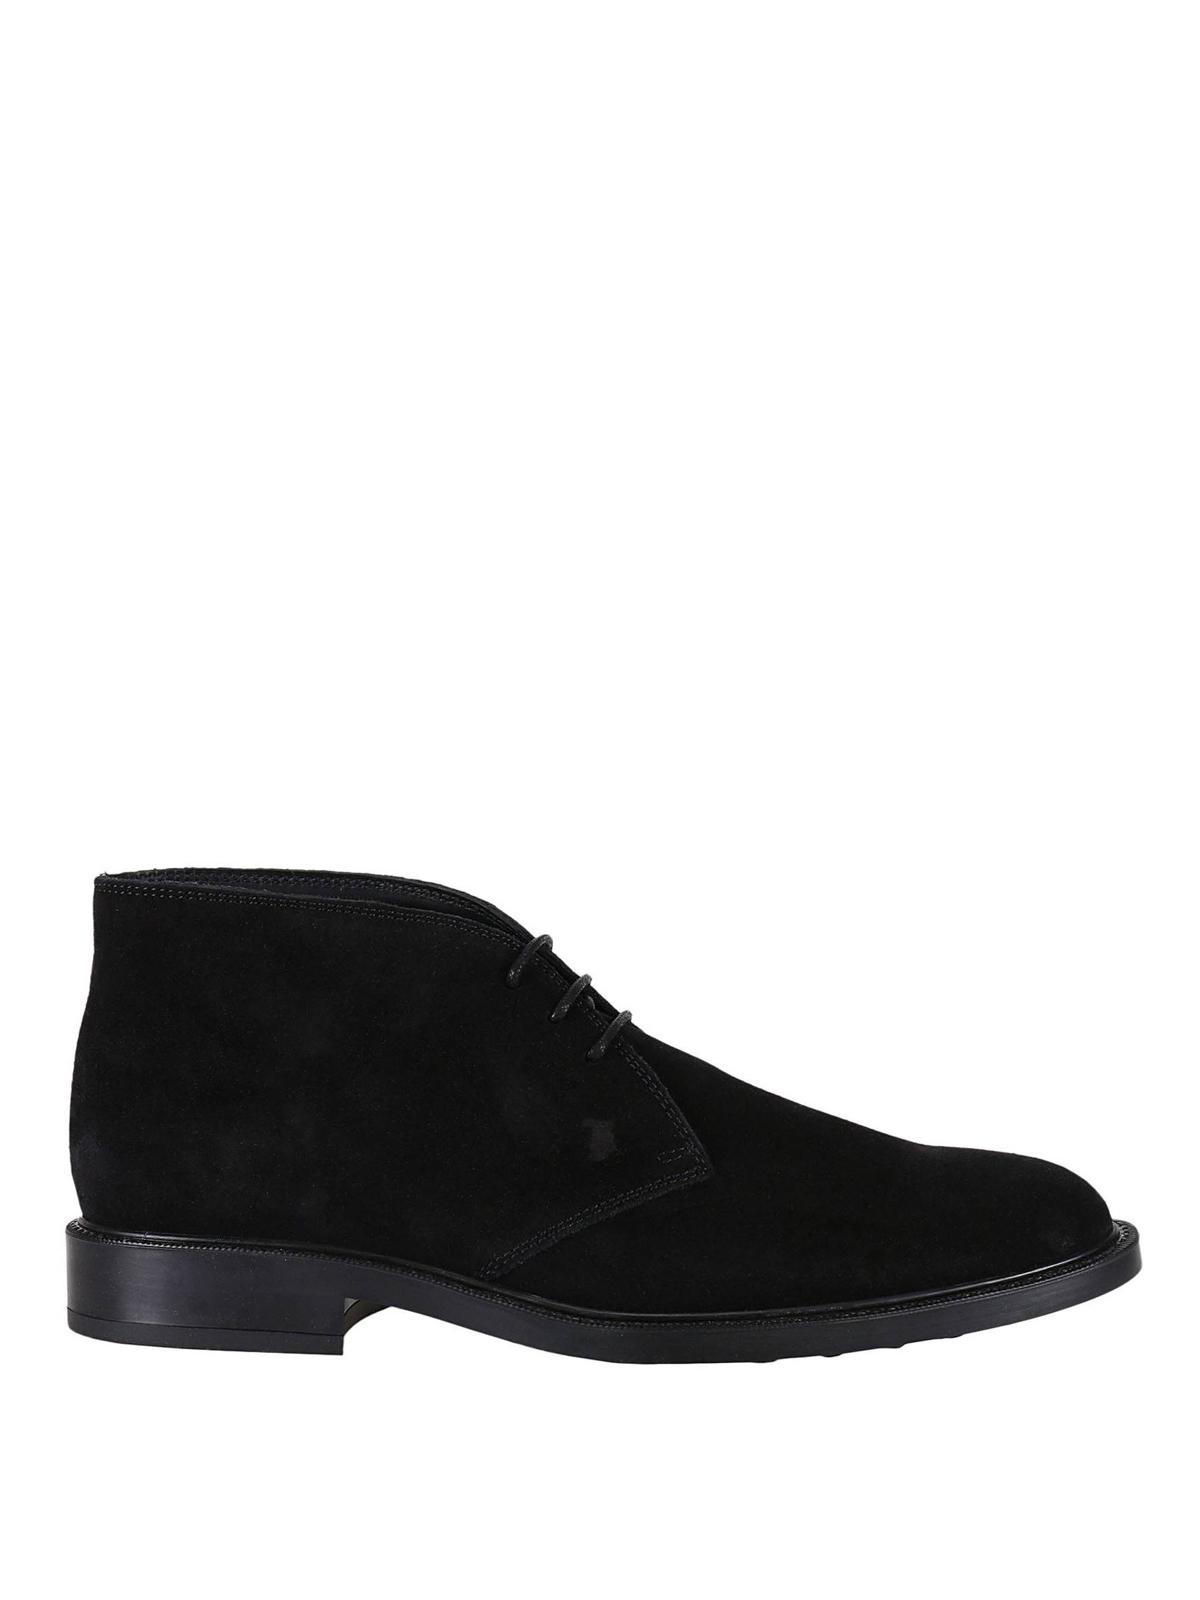 Tod's Black Suede Desert Boots for Men - Lyst